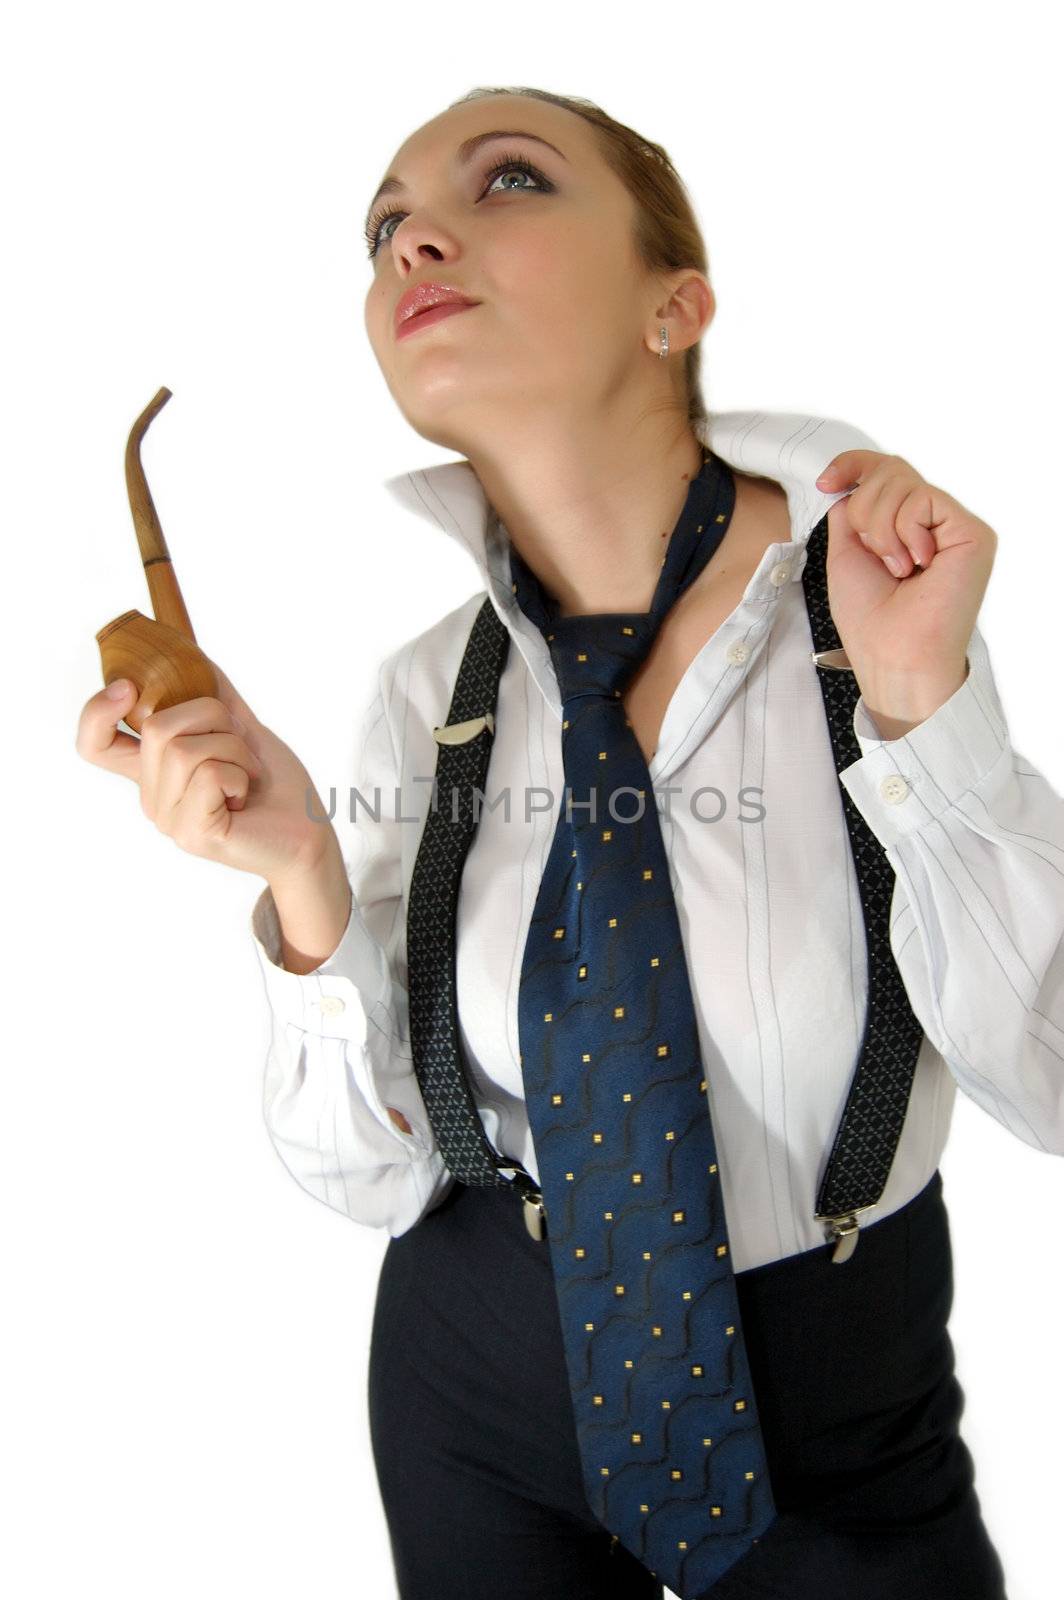 Girl in shirt and suspenders holding retro pipe, isolated on white